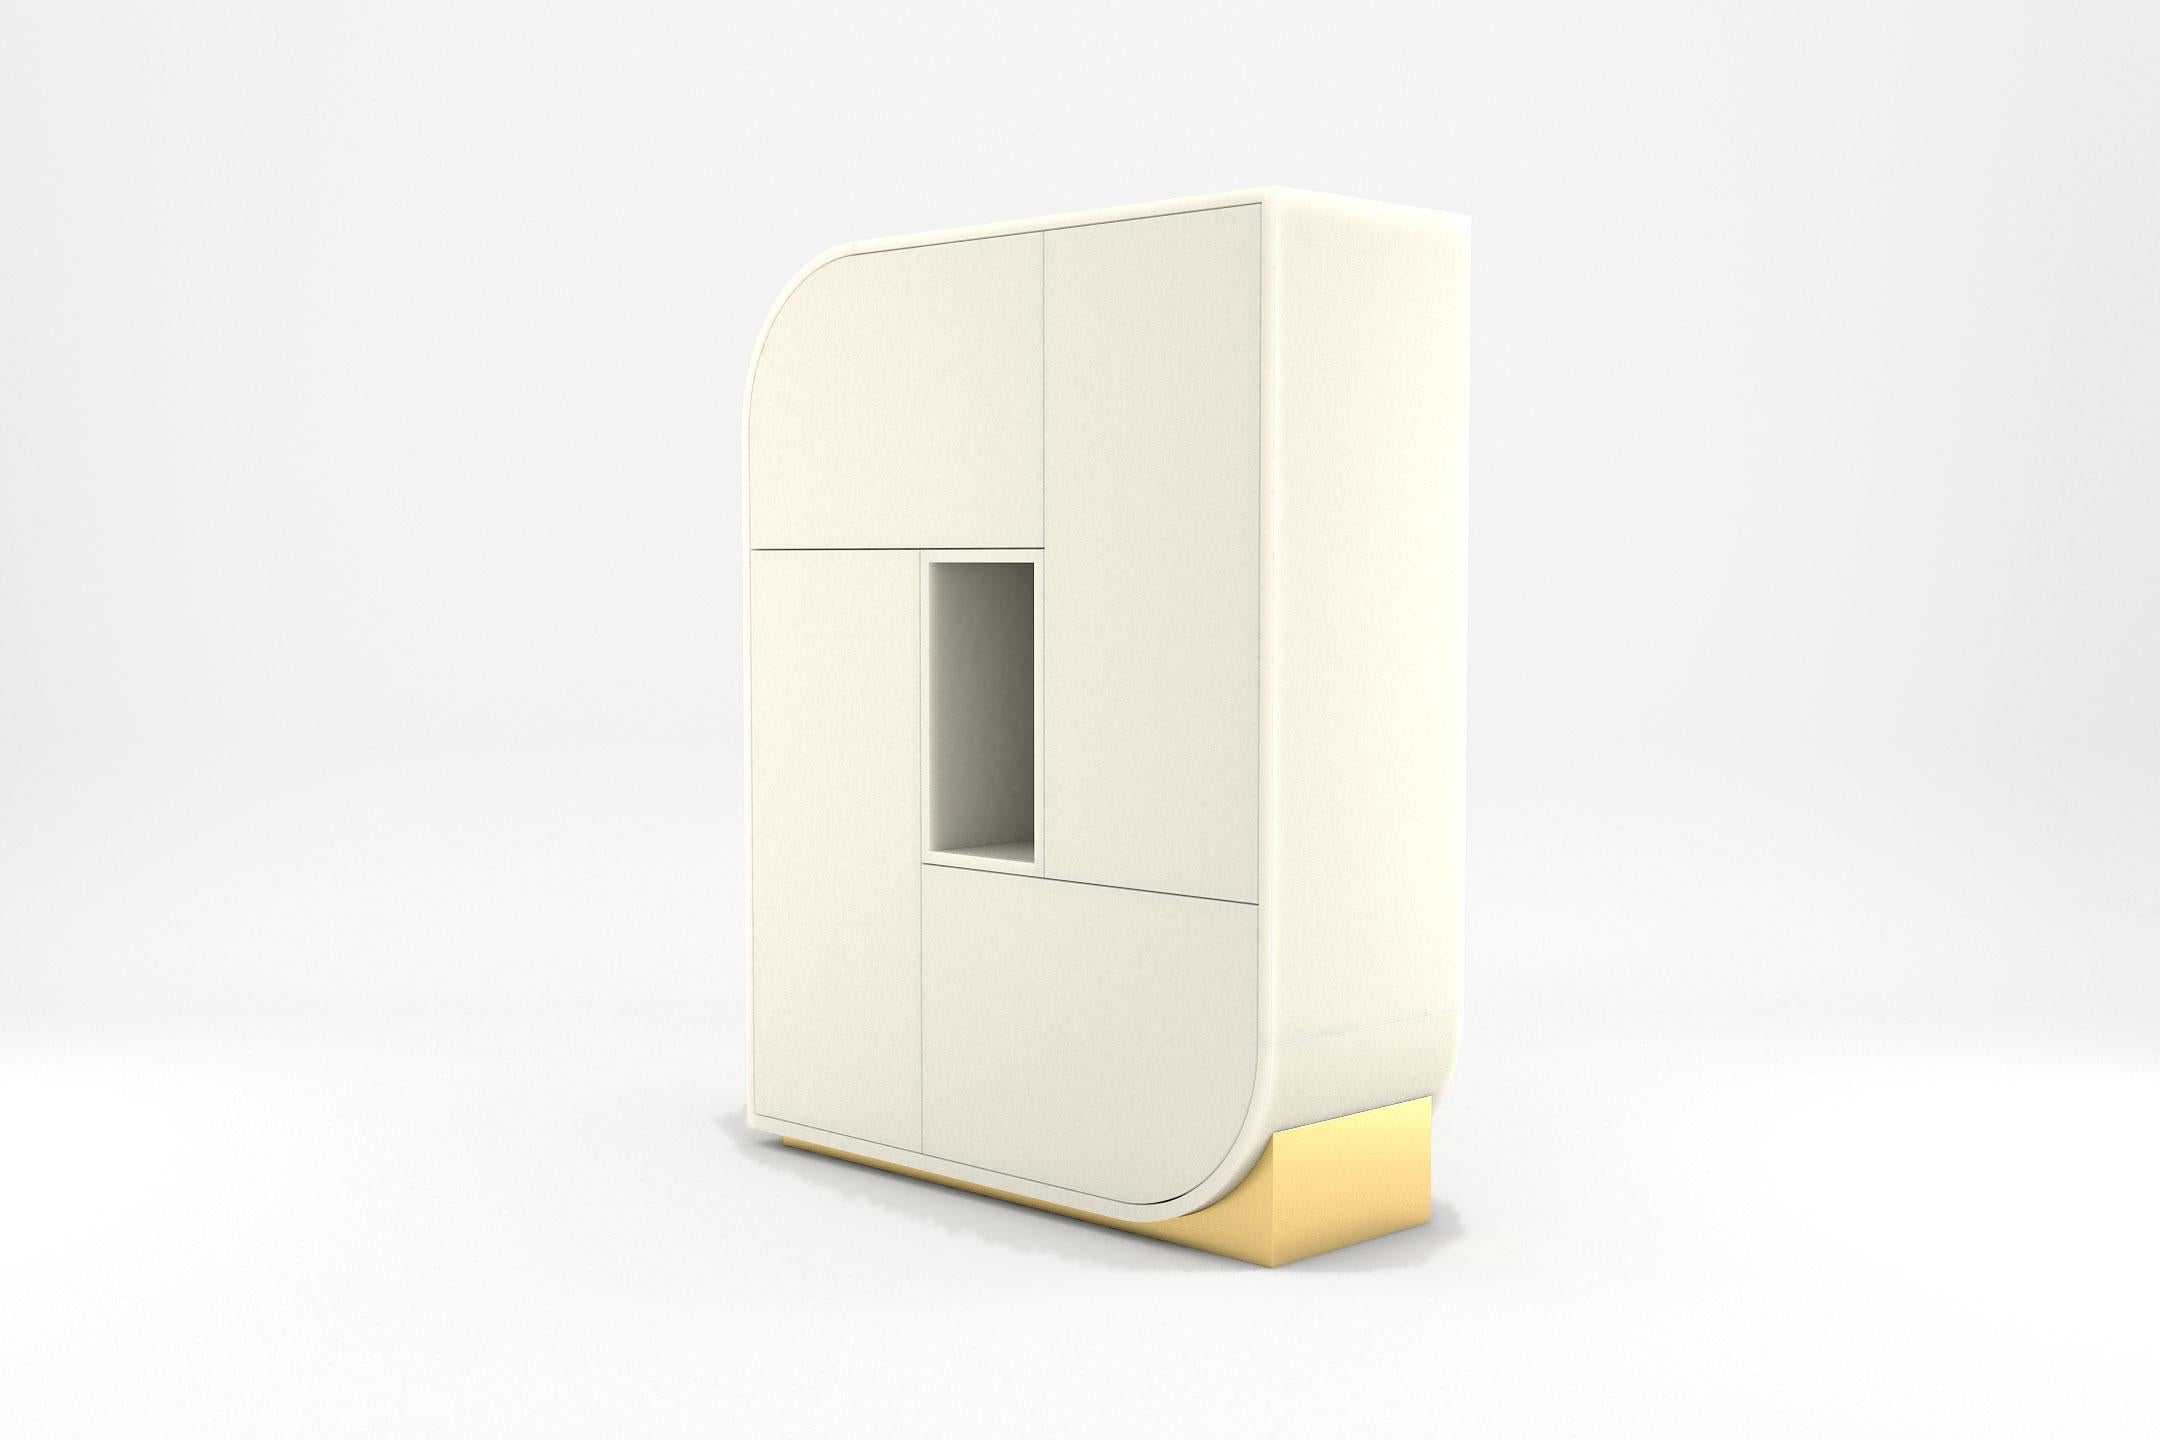 Delta Wardrobe - Modern Wardrobe in Polished White Lacquer with Brass Details In New Condition For Sale In London, GB